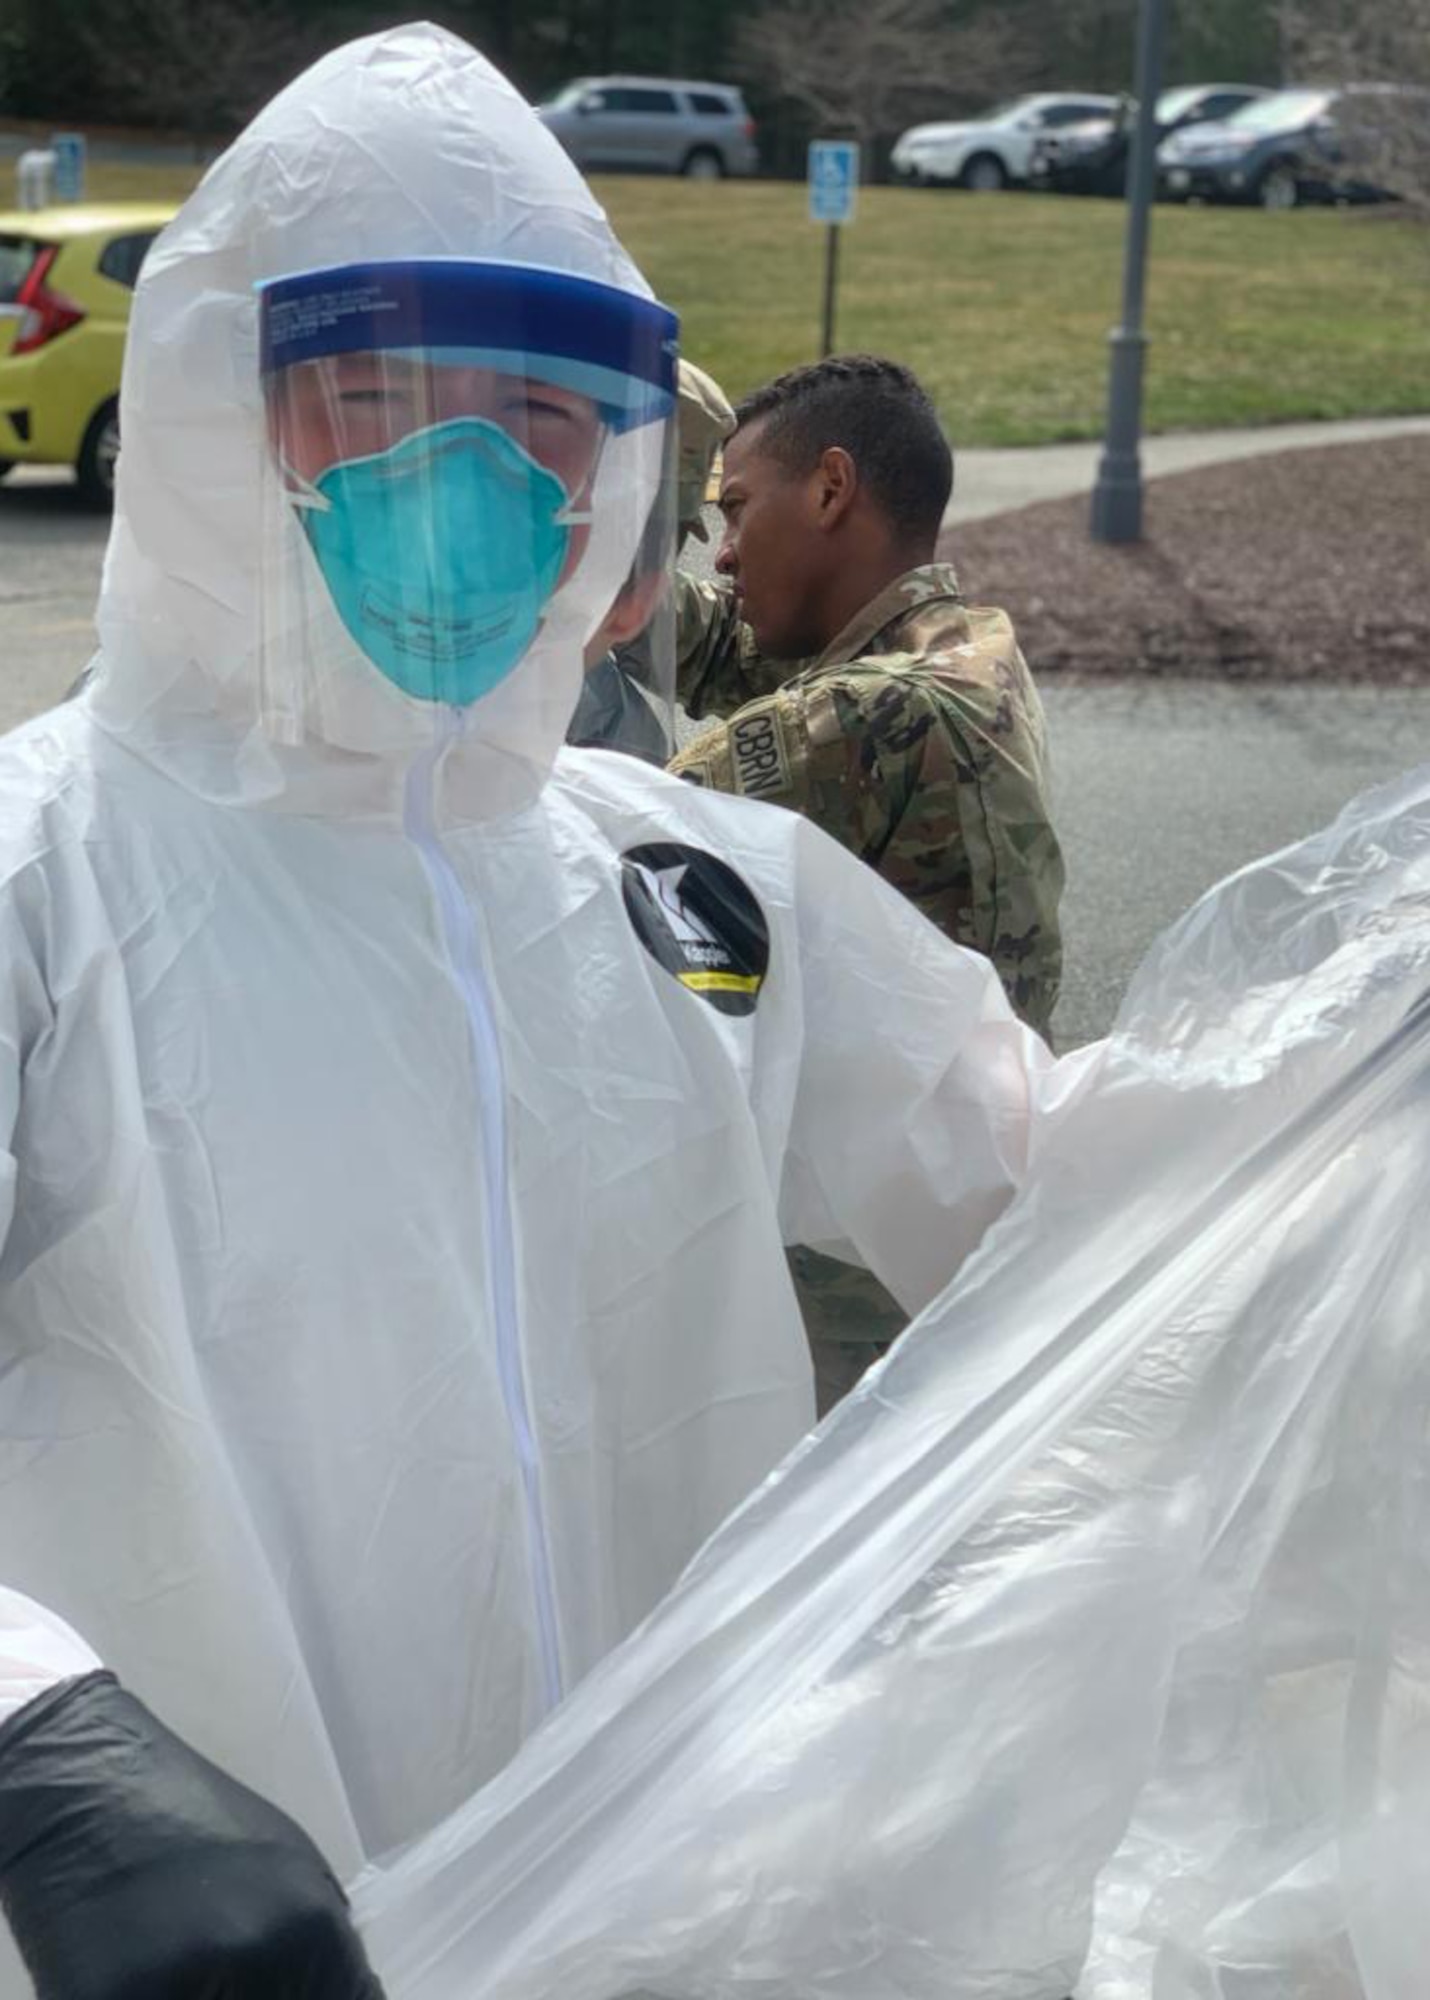 A group of aerospace medical technicians and a medical administrator from the 104th Medical Group spent the last week moving throughout Massachusetts administering tests for COVID-19, sometimes at four locations per day. (Courtesy Photo)